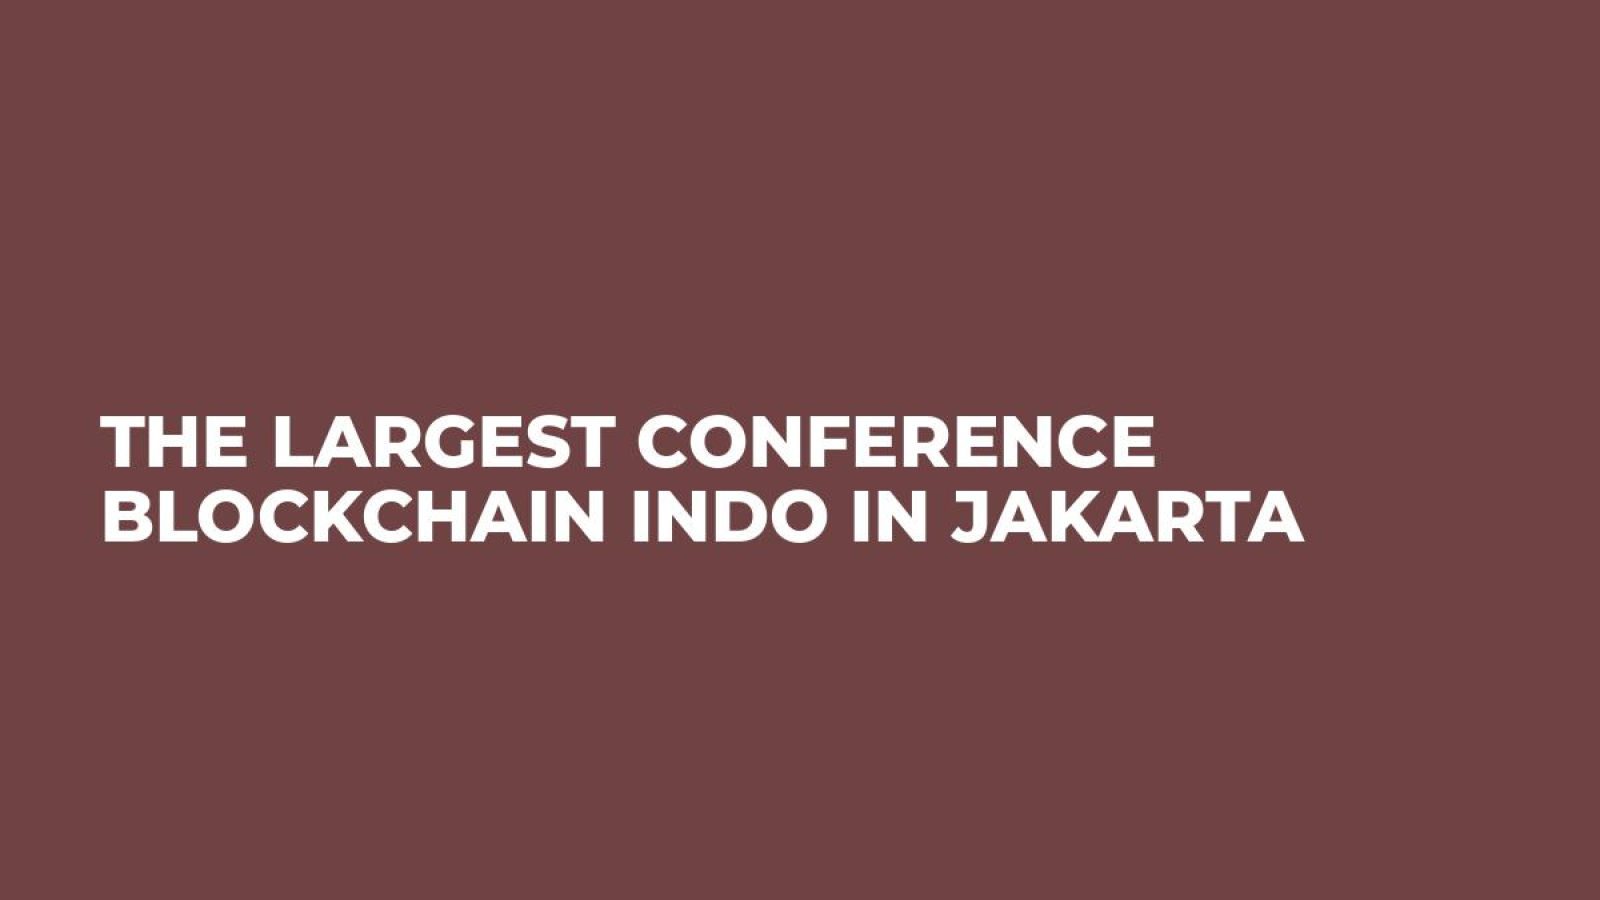 The largest conference Blockchain Indo in Jakarta